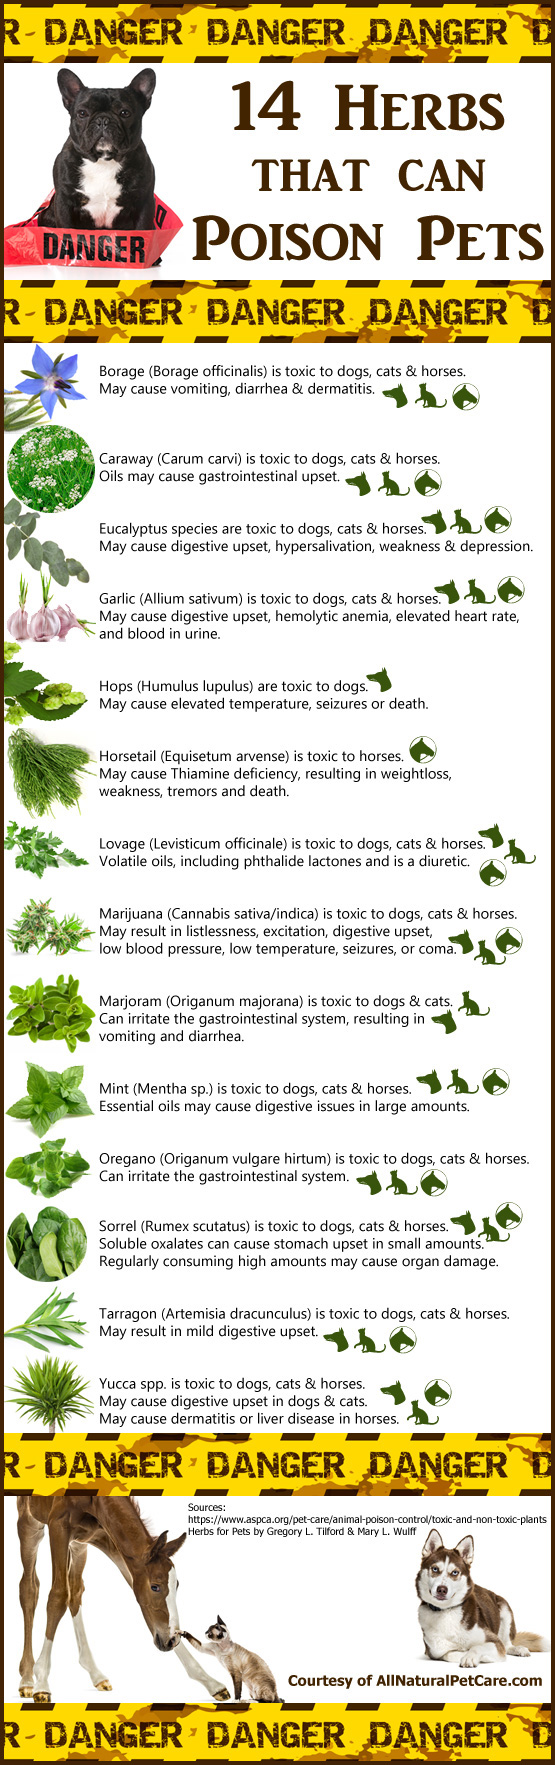 Herbs that may be Toxic to Pets Infographic